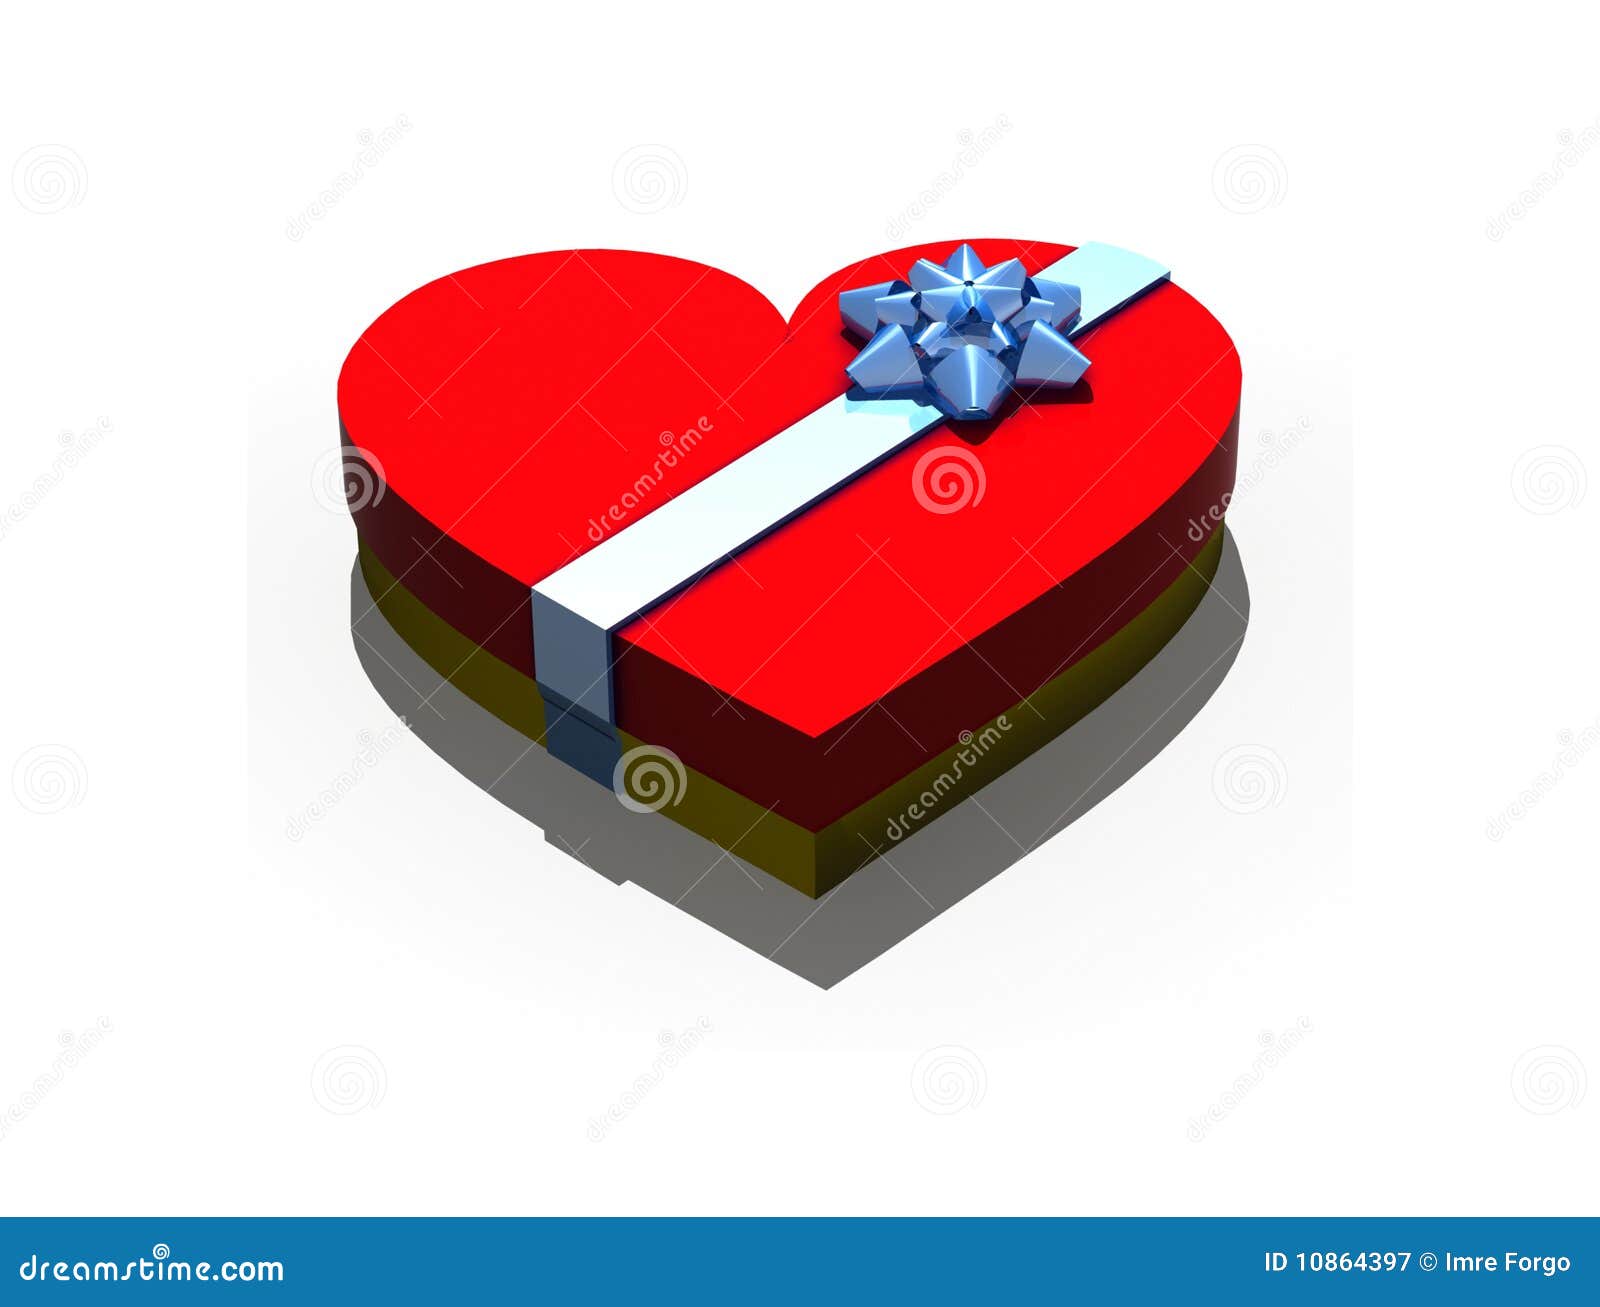 Royalty Free Stock Photography: Isolated gift box in form heart